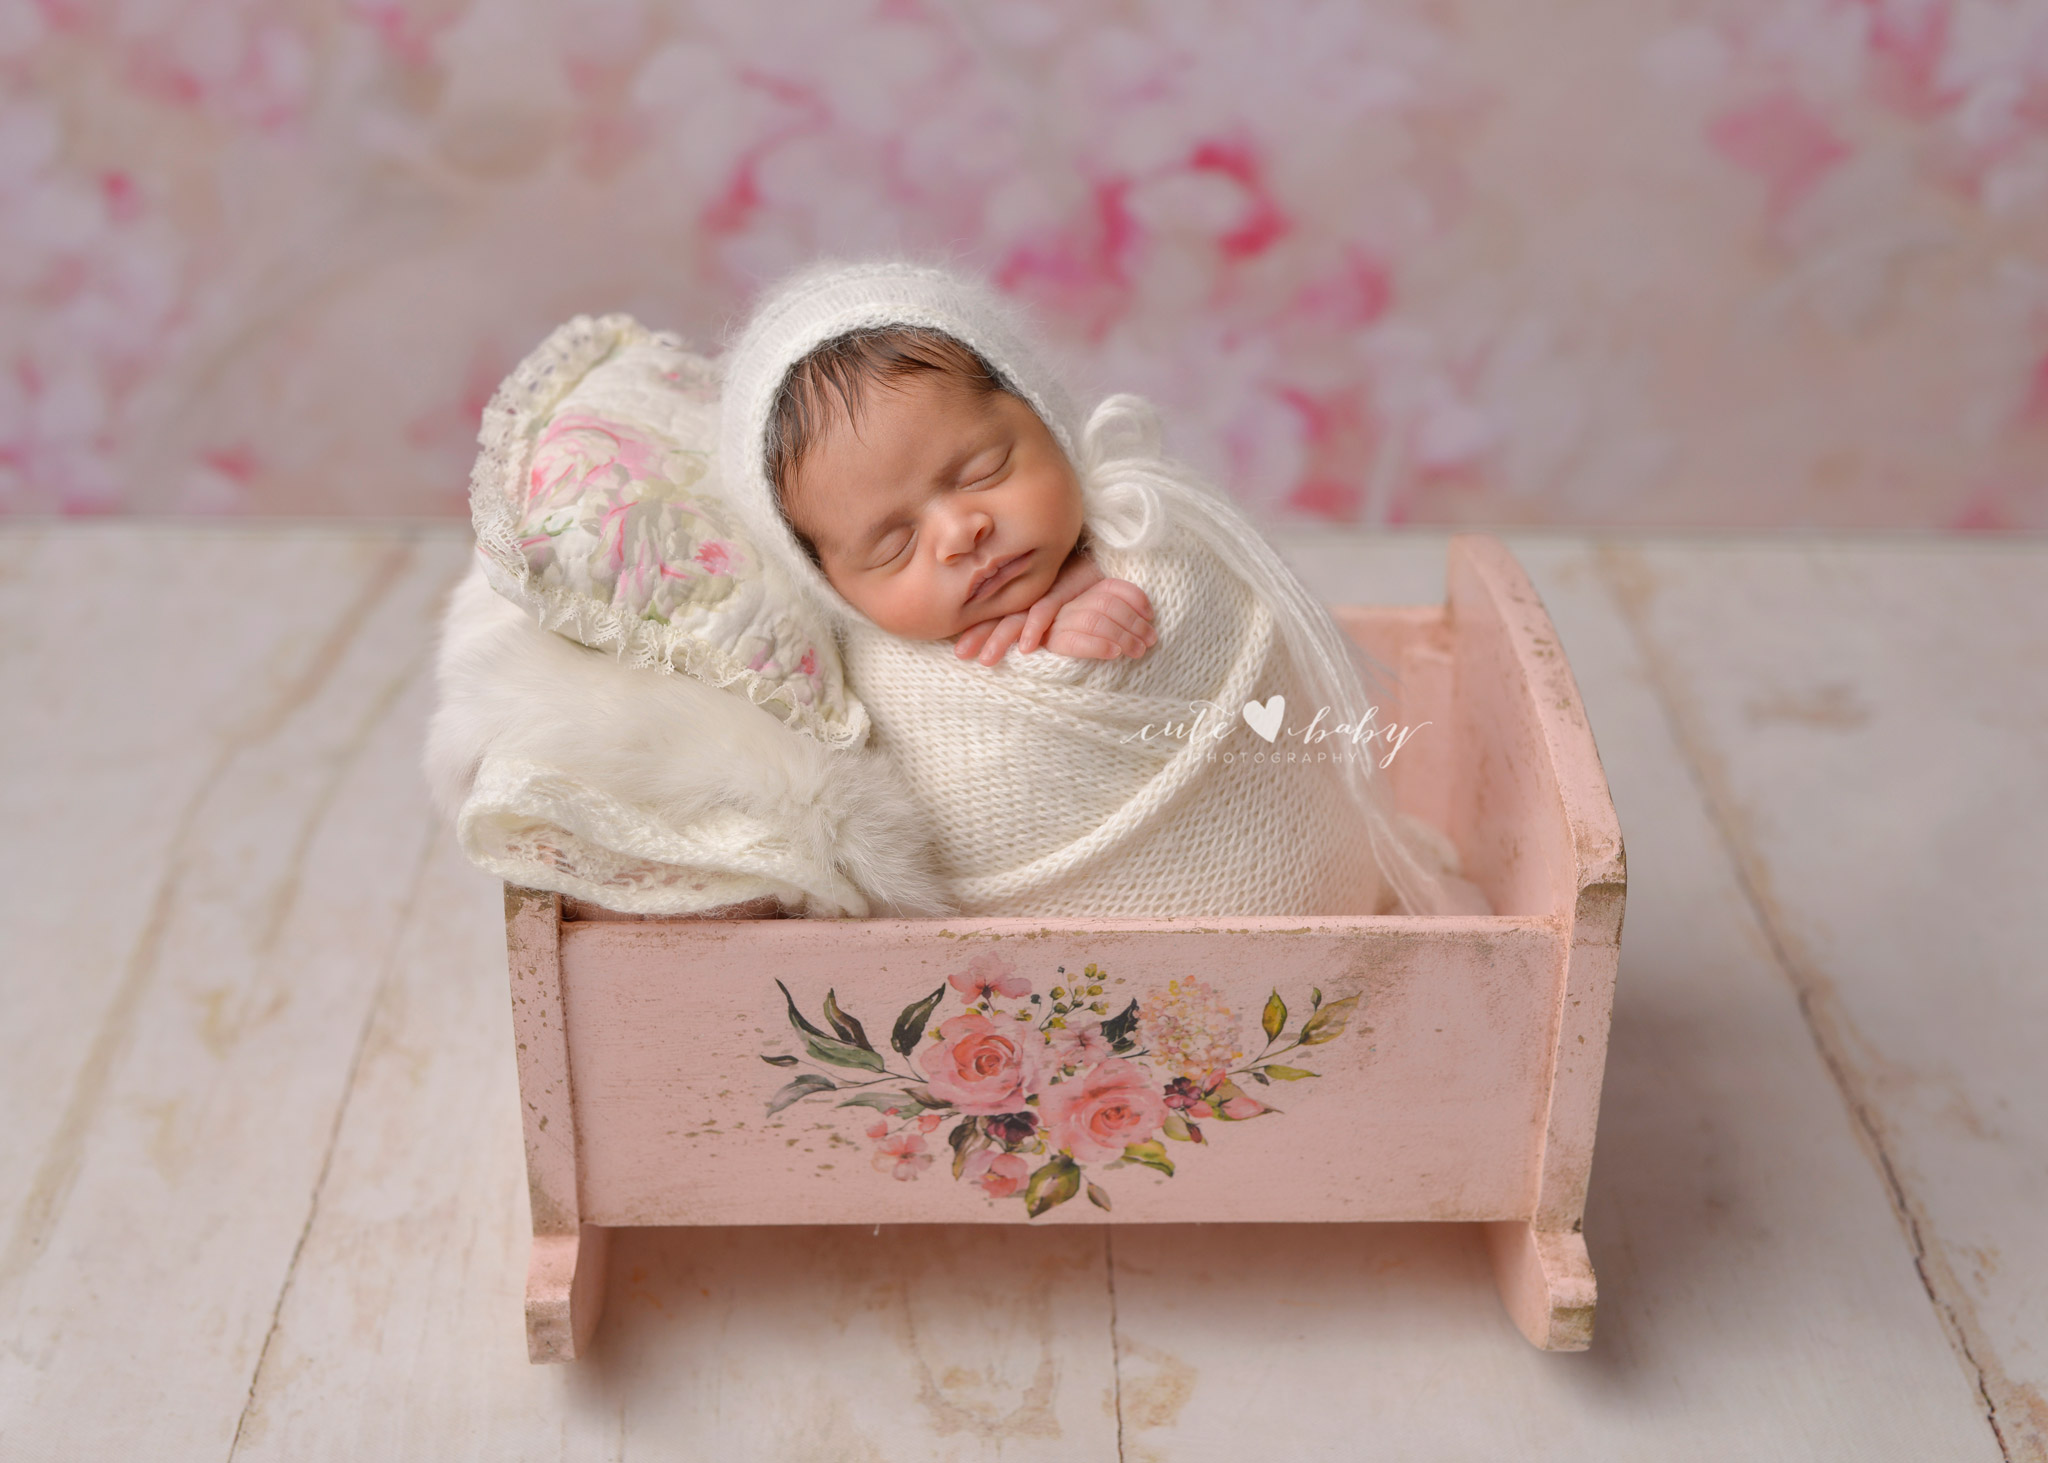 Newborn Photography Manchester by Cute Baby Photography, Studio Newborn photography, Baby Photography, Newborn Session Manchester